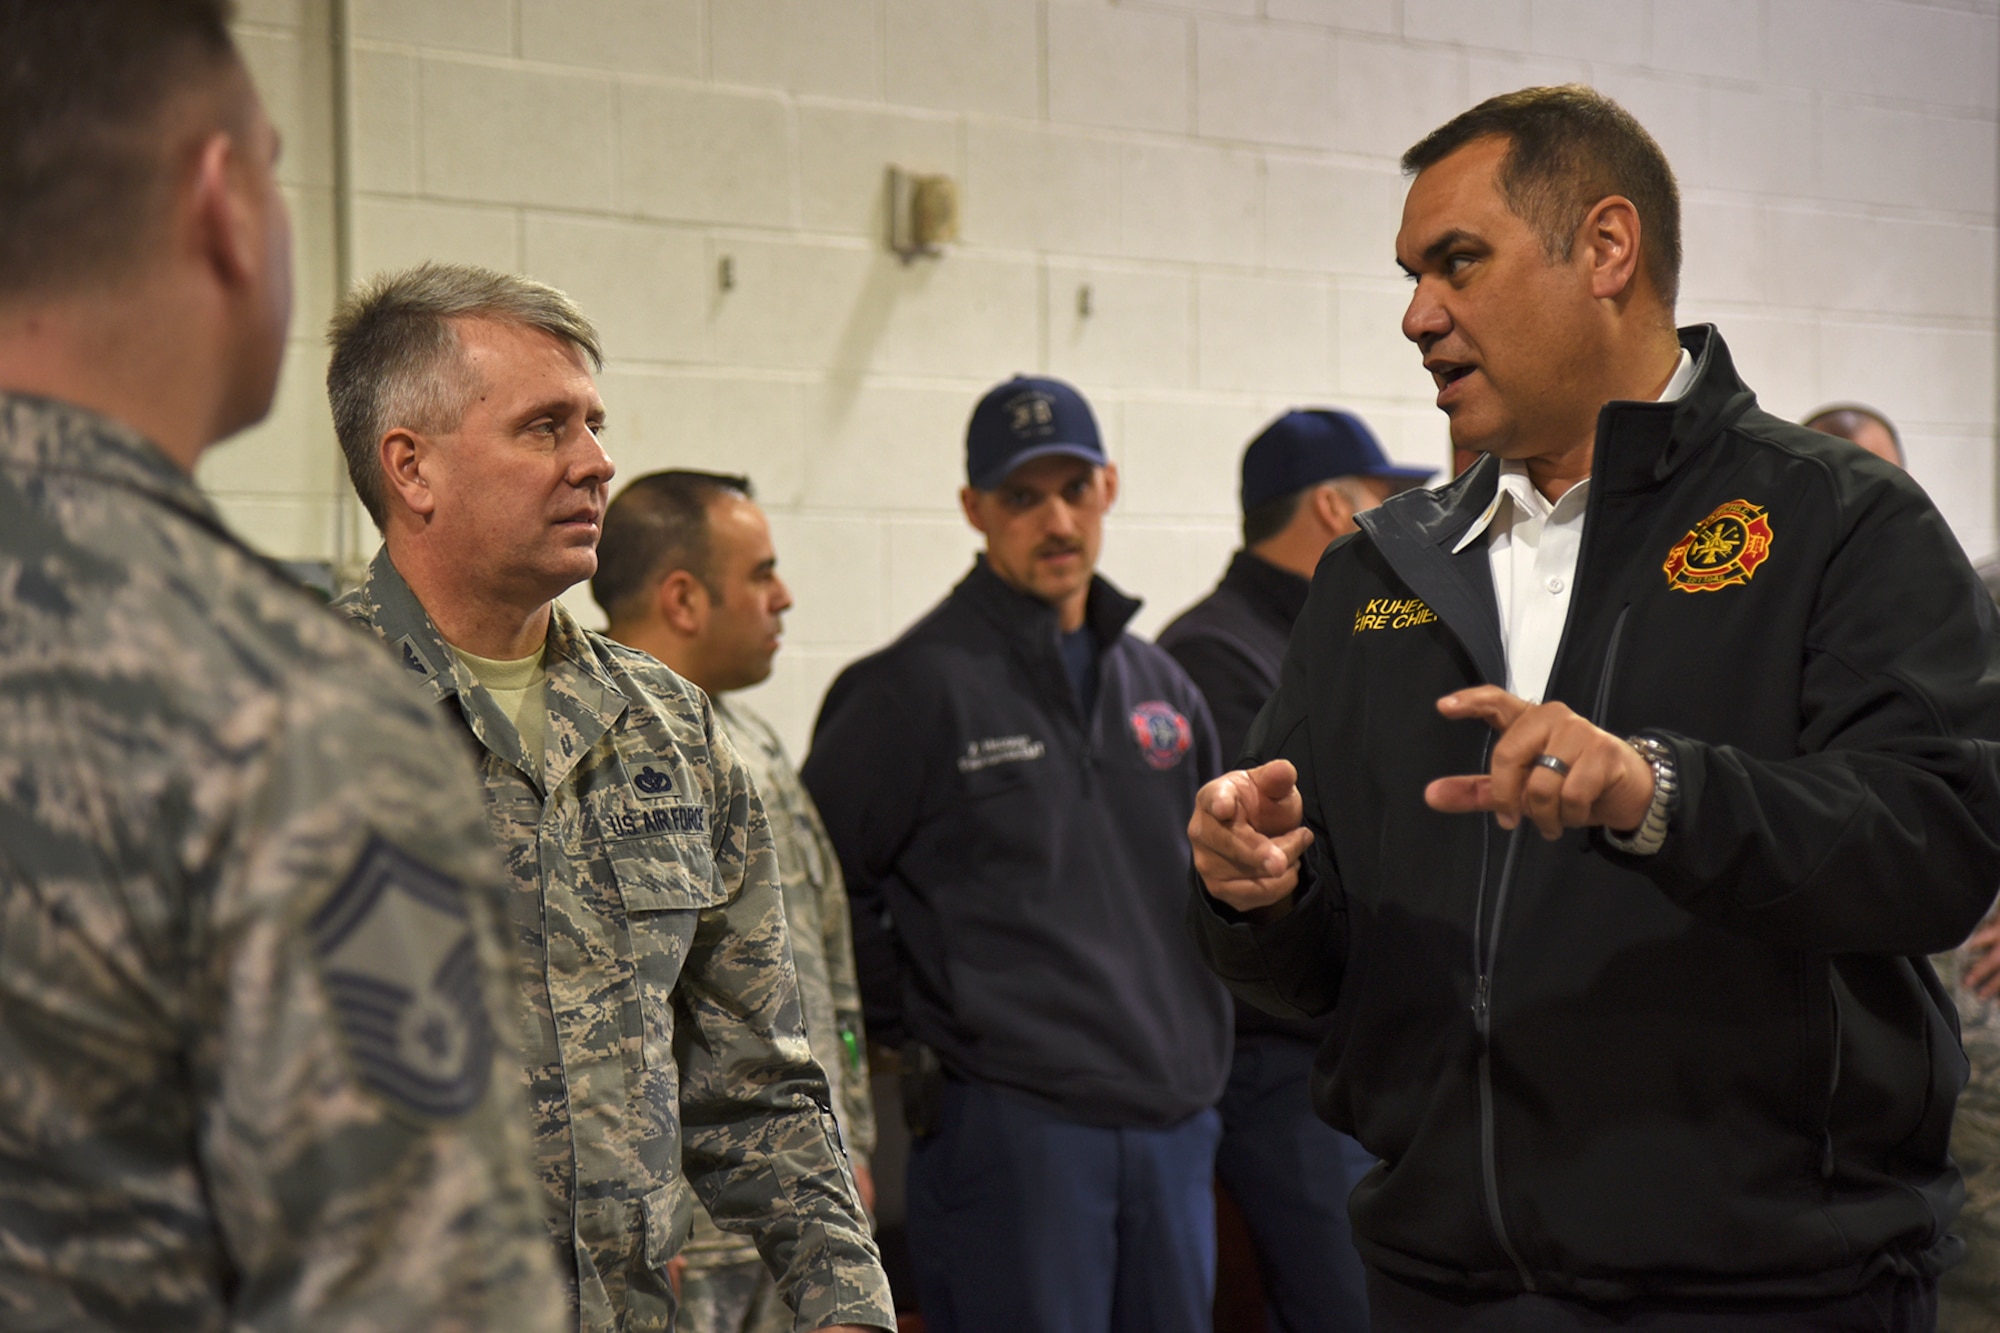 Kimo Kuheana, 92nd Civil Engineer Squadron fire chief, discusses Fairchild Fire Department’s Rapid Intervention Crew training program with Col. James Kossler, Air Force Installation and Mission Support Center Detachment 9 commander, Mar. 29, 2017, at Fairchild Air Force Base, Washington. The AFIMSC was established to help the Air Force make the best use of limited resources in the management and operation of its installations; Detachment 9 oversees functions in the comptroller, civil engineer, communications, security forces, personnel and support career fields. (U.S. Air Force photo/Senior Airman Mackenzie Richardson)